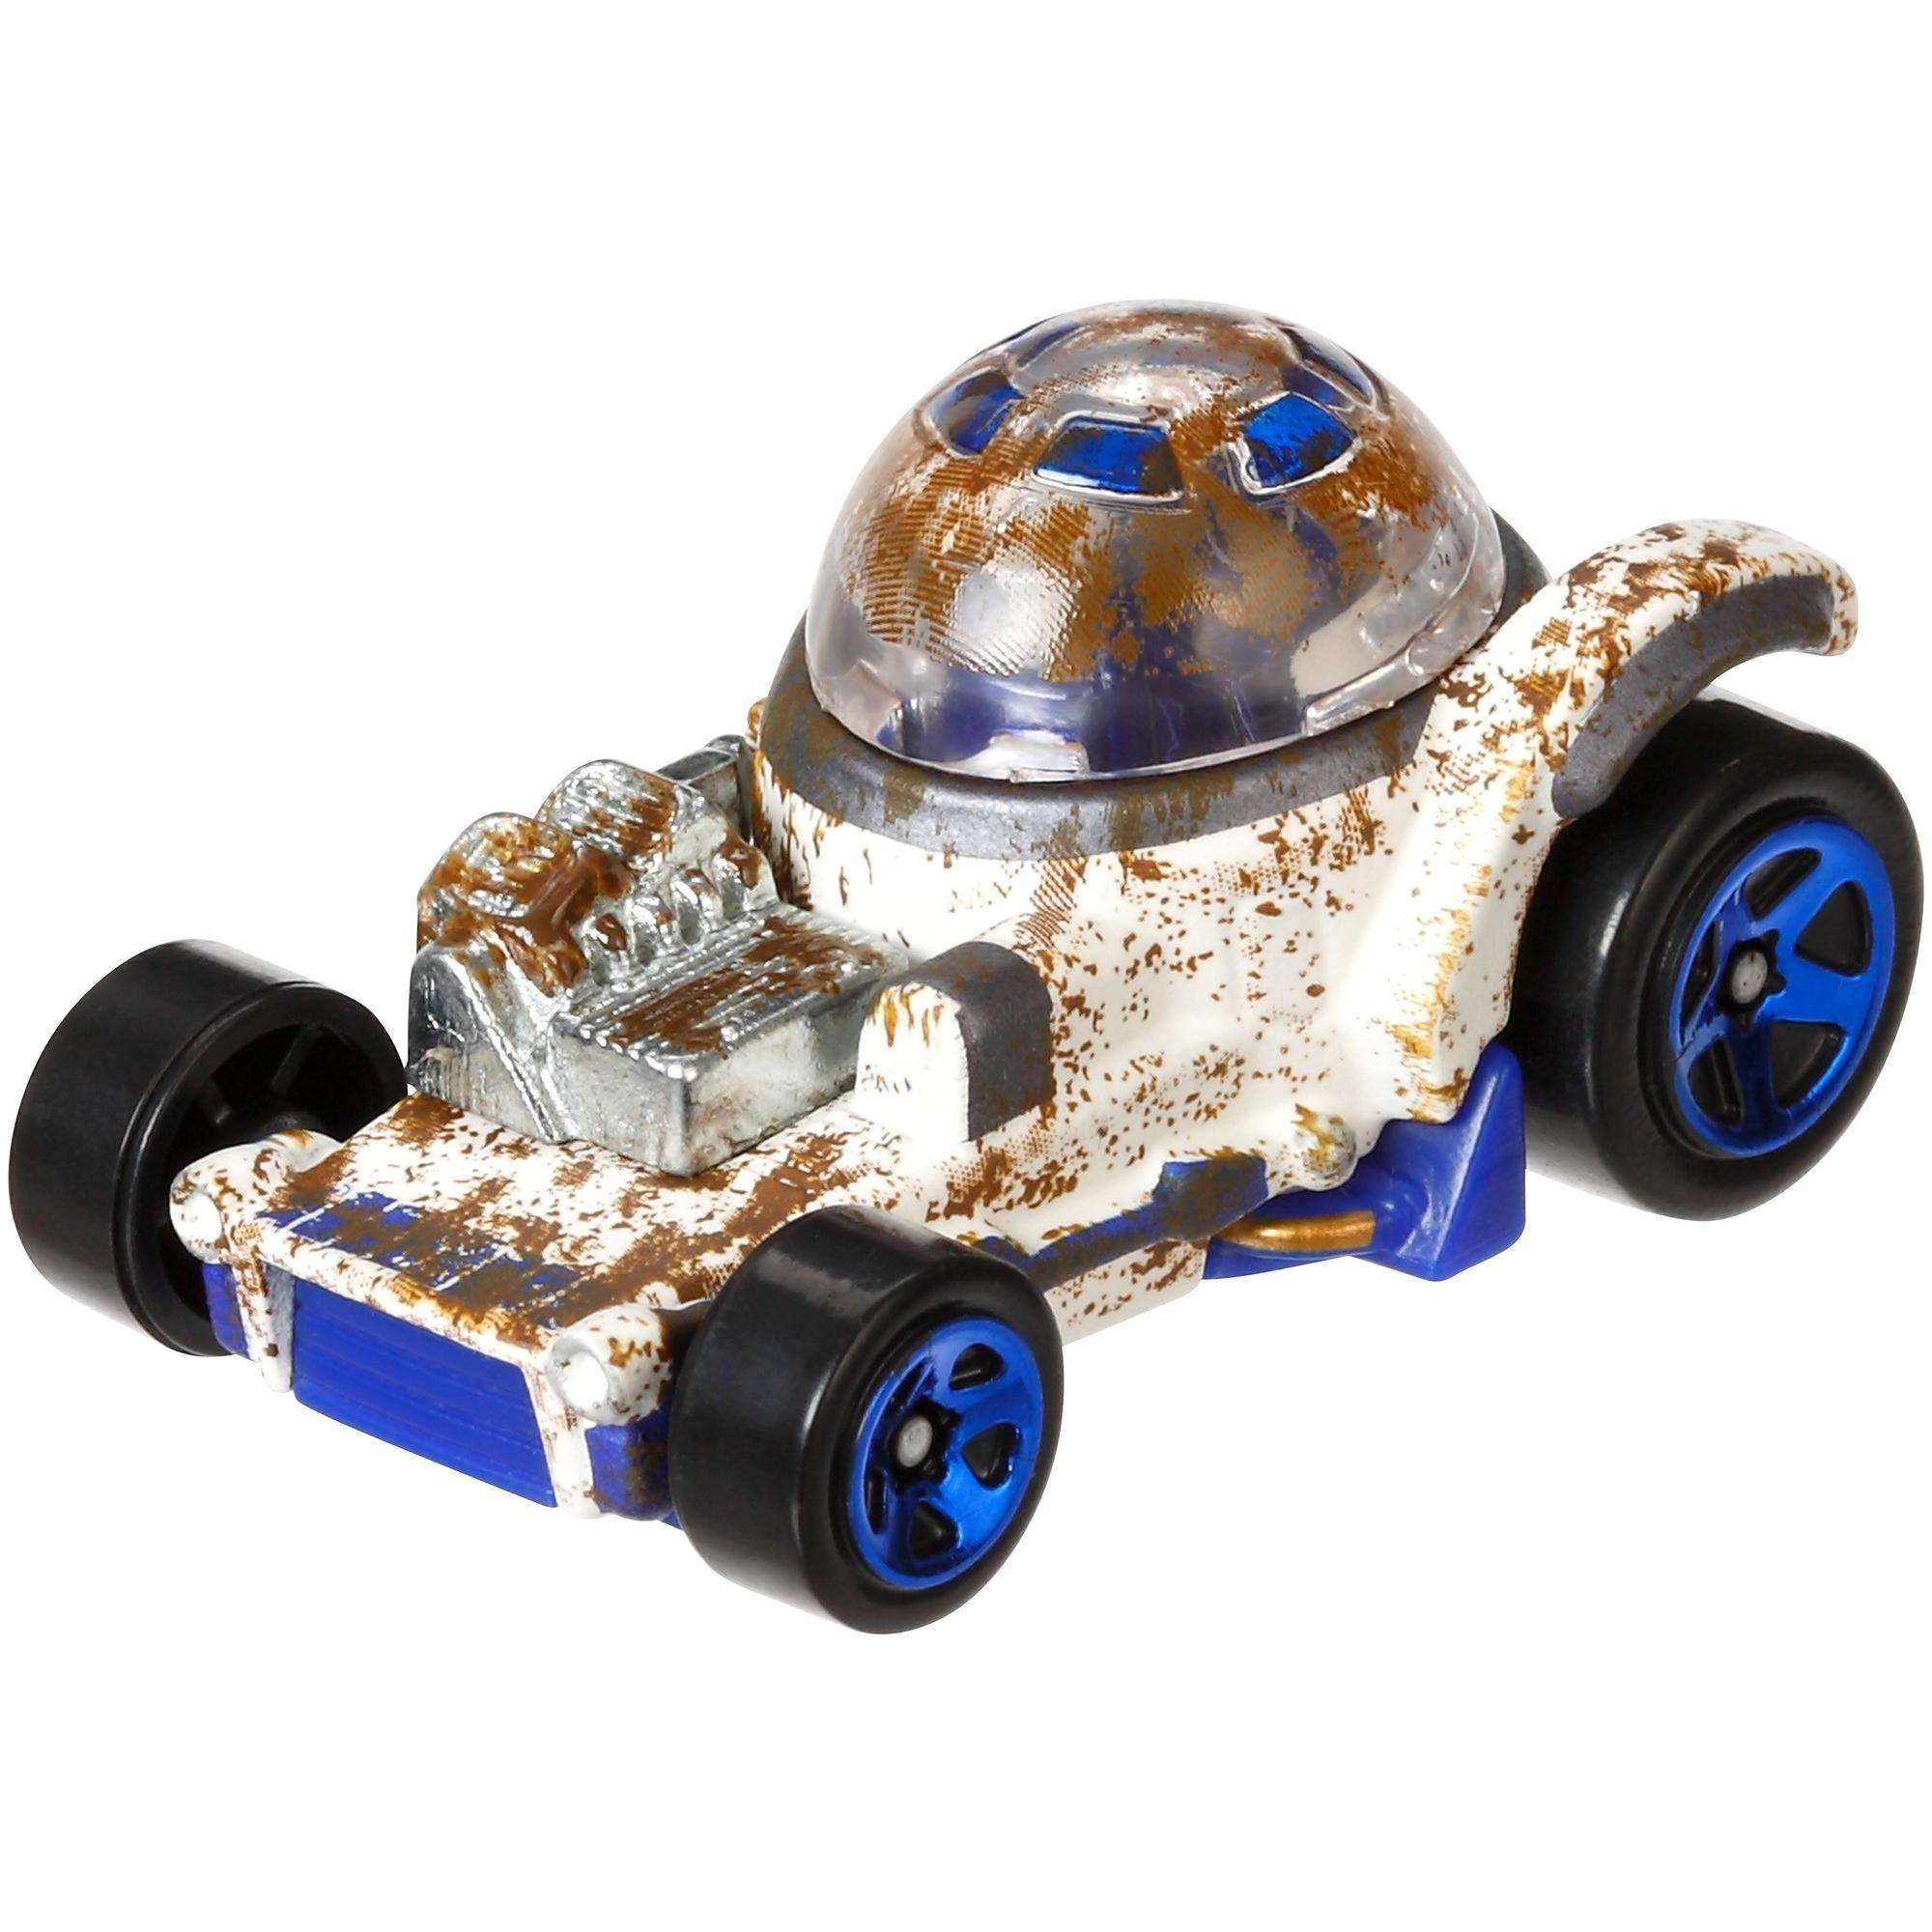 Star Wars Hot Wheels C-3PO & R2-D2 Character Vehicles (2014) Mattel Toy Car 2-Pack - image 3 of 5